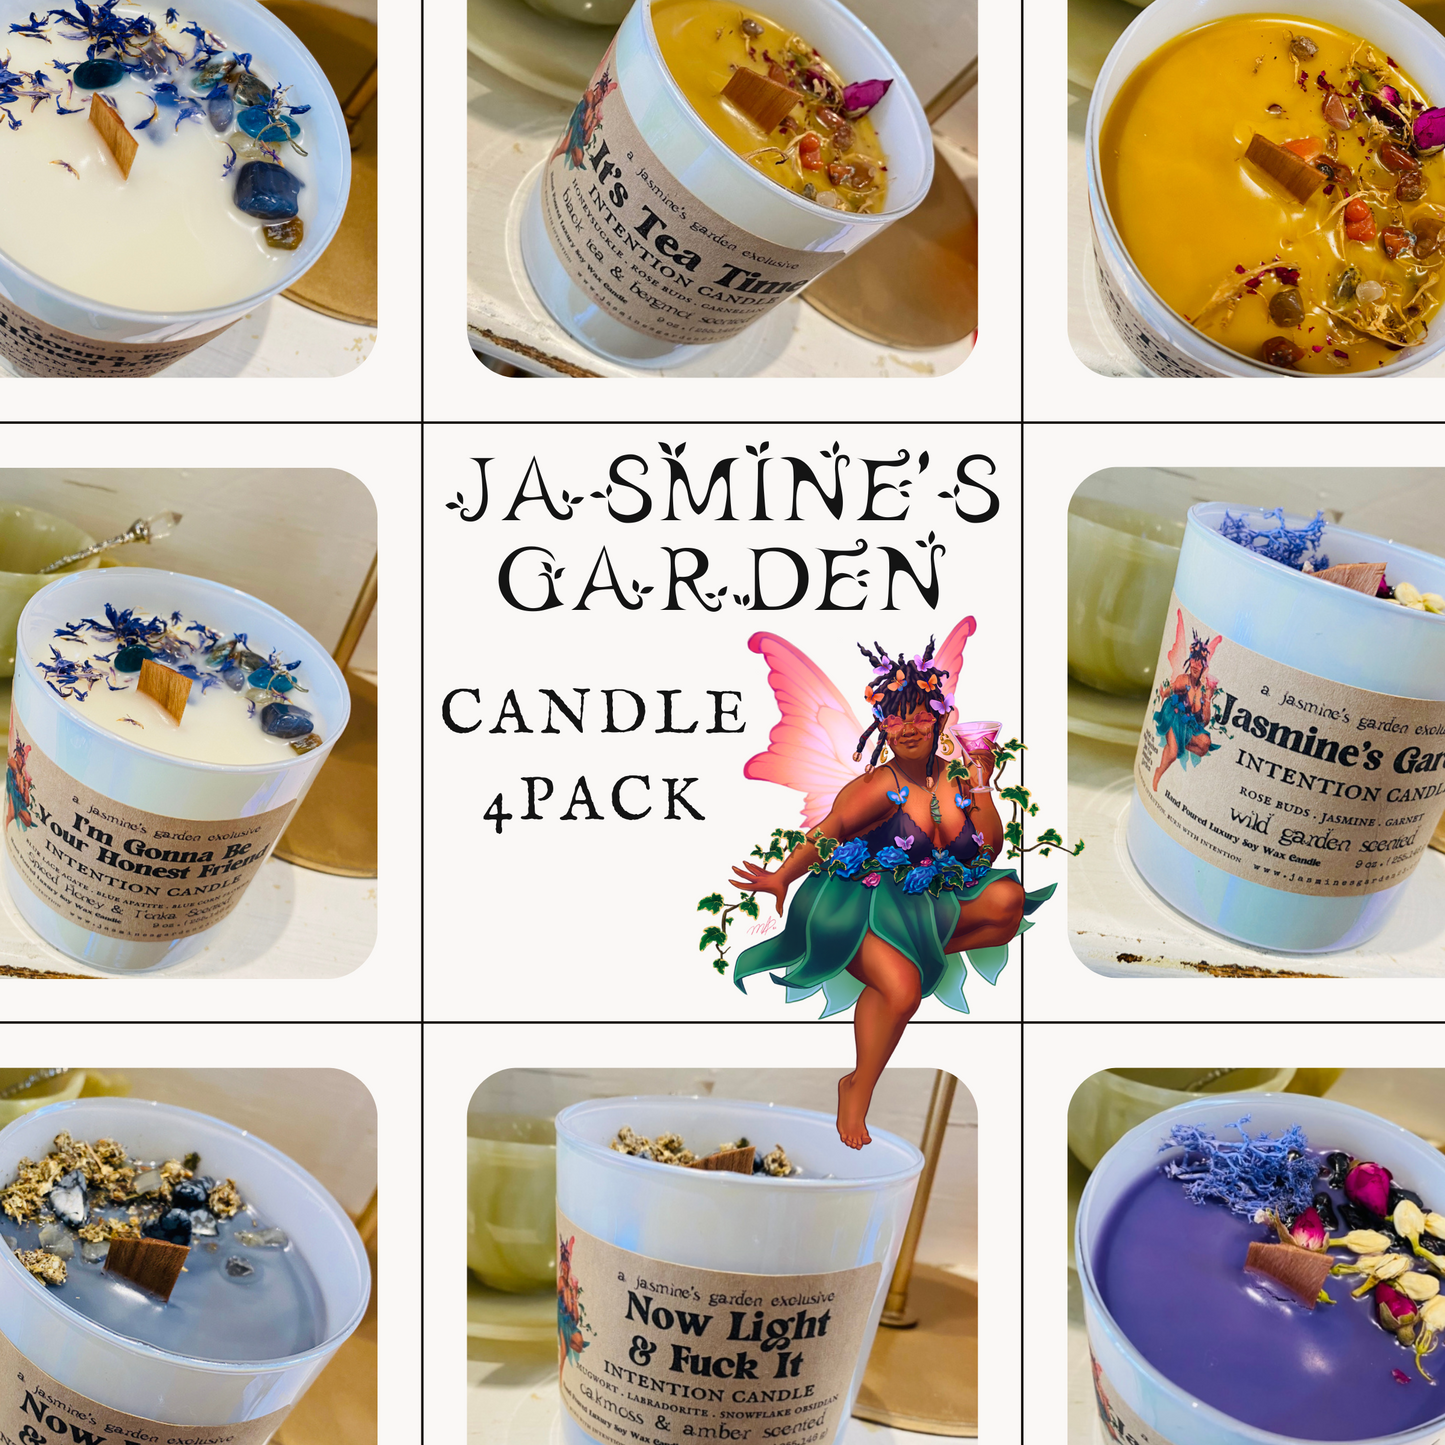 Candle 4 Pack - Jasmine's Garden EXCLUSIVE Organic Coconut Soy Wax Intention Candles 9 oz